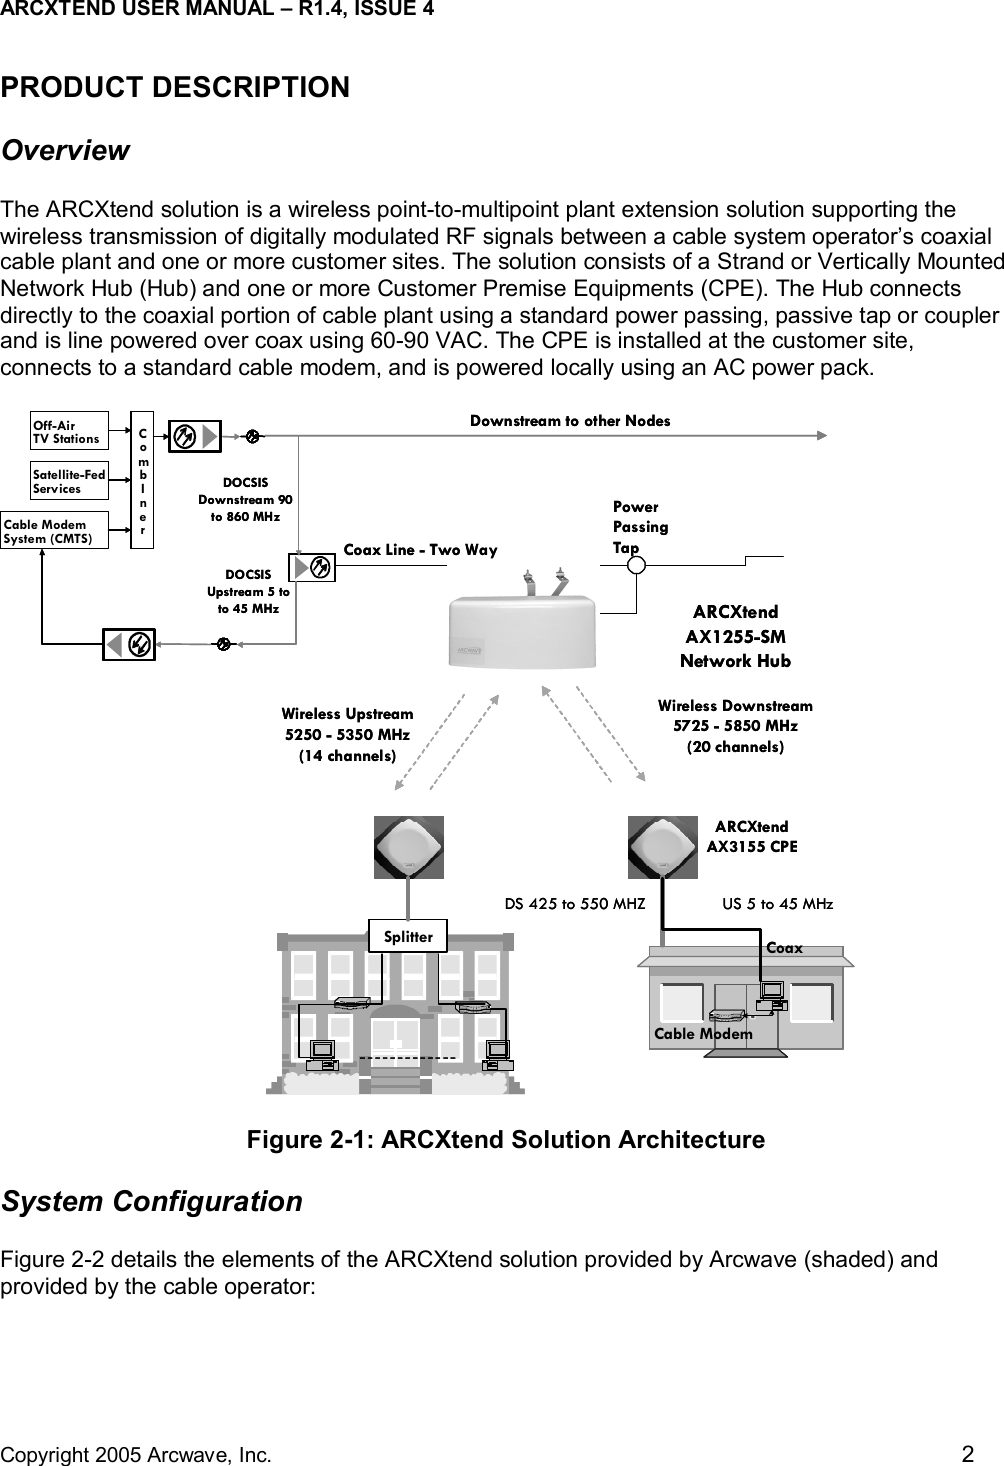 ARCXTEND USER MANUAL – R1.4, ISSUE 4  Copyright 2005 Arcwave, Inc.    2 PRODUCT DESCRIPTION Overview   The ARCXtend solution is a wireless point-to-multipoint plant extension solution supporting the wireless transmission of digitally modulated RF signals between a cable system operator’s coaxial cable plant and one or more customer sites. The solution consists of a Strand or Vertically Mounted Network Hub (Hub) and one or more Customer Premise Equipments (CPE). The Hub connects directly to the coaxial portion of cable plant using a standard power passing, passive tap or coupler and is line powered over coax using 60-90 VAC. The CPE is installed at the customer site, connects to a standard cable modem, and is powered locally using an AC power pack.  Coax Line - Two WayDownstream to other NodesPower Passing TapWireless Upstream5250 - 5350 MHz(14 channels)ARCXtend AX1255-SM Network HubWireless Downstream5725 - 5850 MHz(20 channels)Off-AirTV StationsSatellite-FedServicesCable ModemSystem (CMTS)CombInerDOCSIS Downstream 90 to 860 MHzDOCSIS Upstream 5 to to 45 MHzCable ModemARCXtend AX3155 CPESplitter CoaxDS 425 to 550 MHZ US 5 to 45 MHzCoax Line - Two WayDownstream to other NodesPower Passing TapWireless Upstream5250 - 5350 MHz(14 channels)ARCXtend AX1255-SM Network HubWireless Downstream5725 - 5850 MHz(20 channels)Off-AirTV StationsSatellite-FedServicesCable ModemSystem (CMTS)CombInerDOCSIS Downstream 90 to 860 MHzDOCSIS Upstream 5 to to 45 MHzCable ModemARCXtend AX3155 CPESplitter CoaxDS 425 to 550 MHZ US 5 to 45 MHz Figure 2-1: ARCXtend Solution Architecture System Configuration Figure 2-2 details the elements of the ARCXtend solution provided by Arcwave (shaded) and provided by the cable operator:  